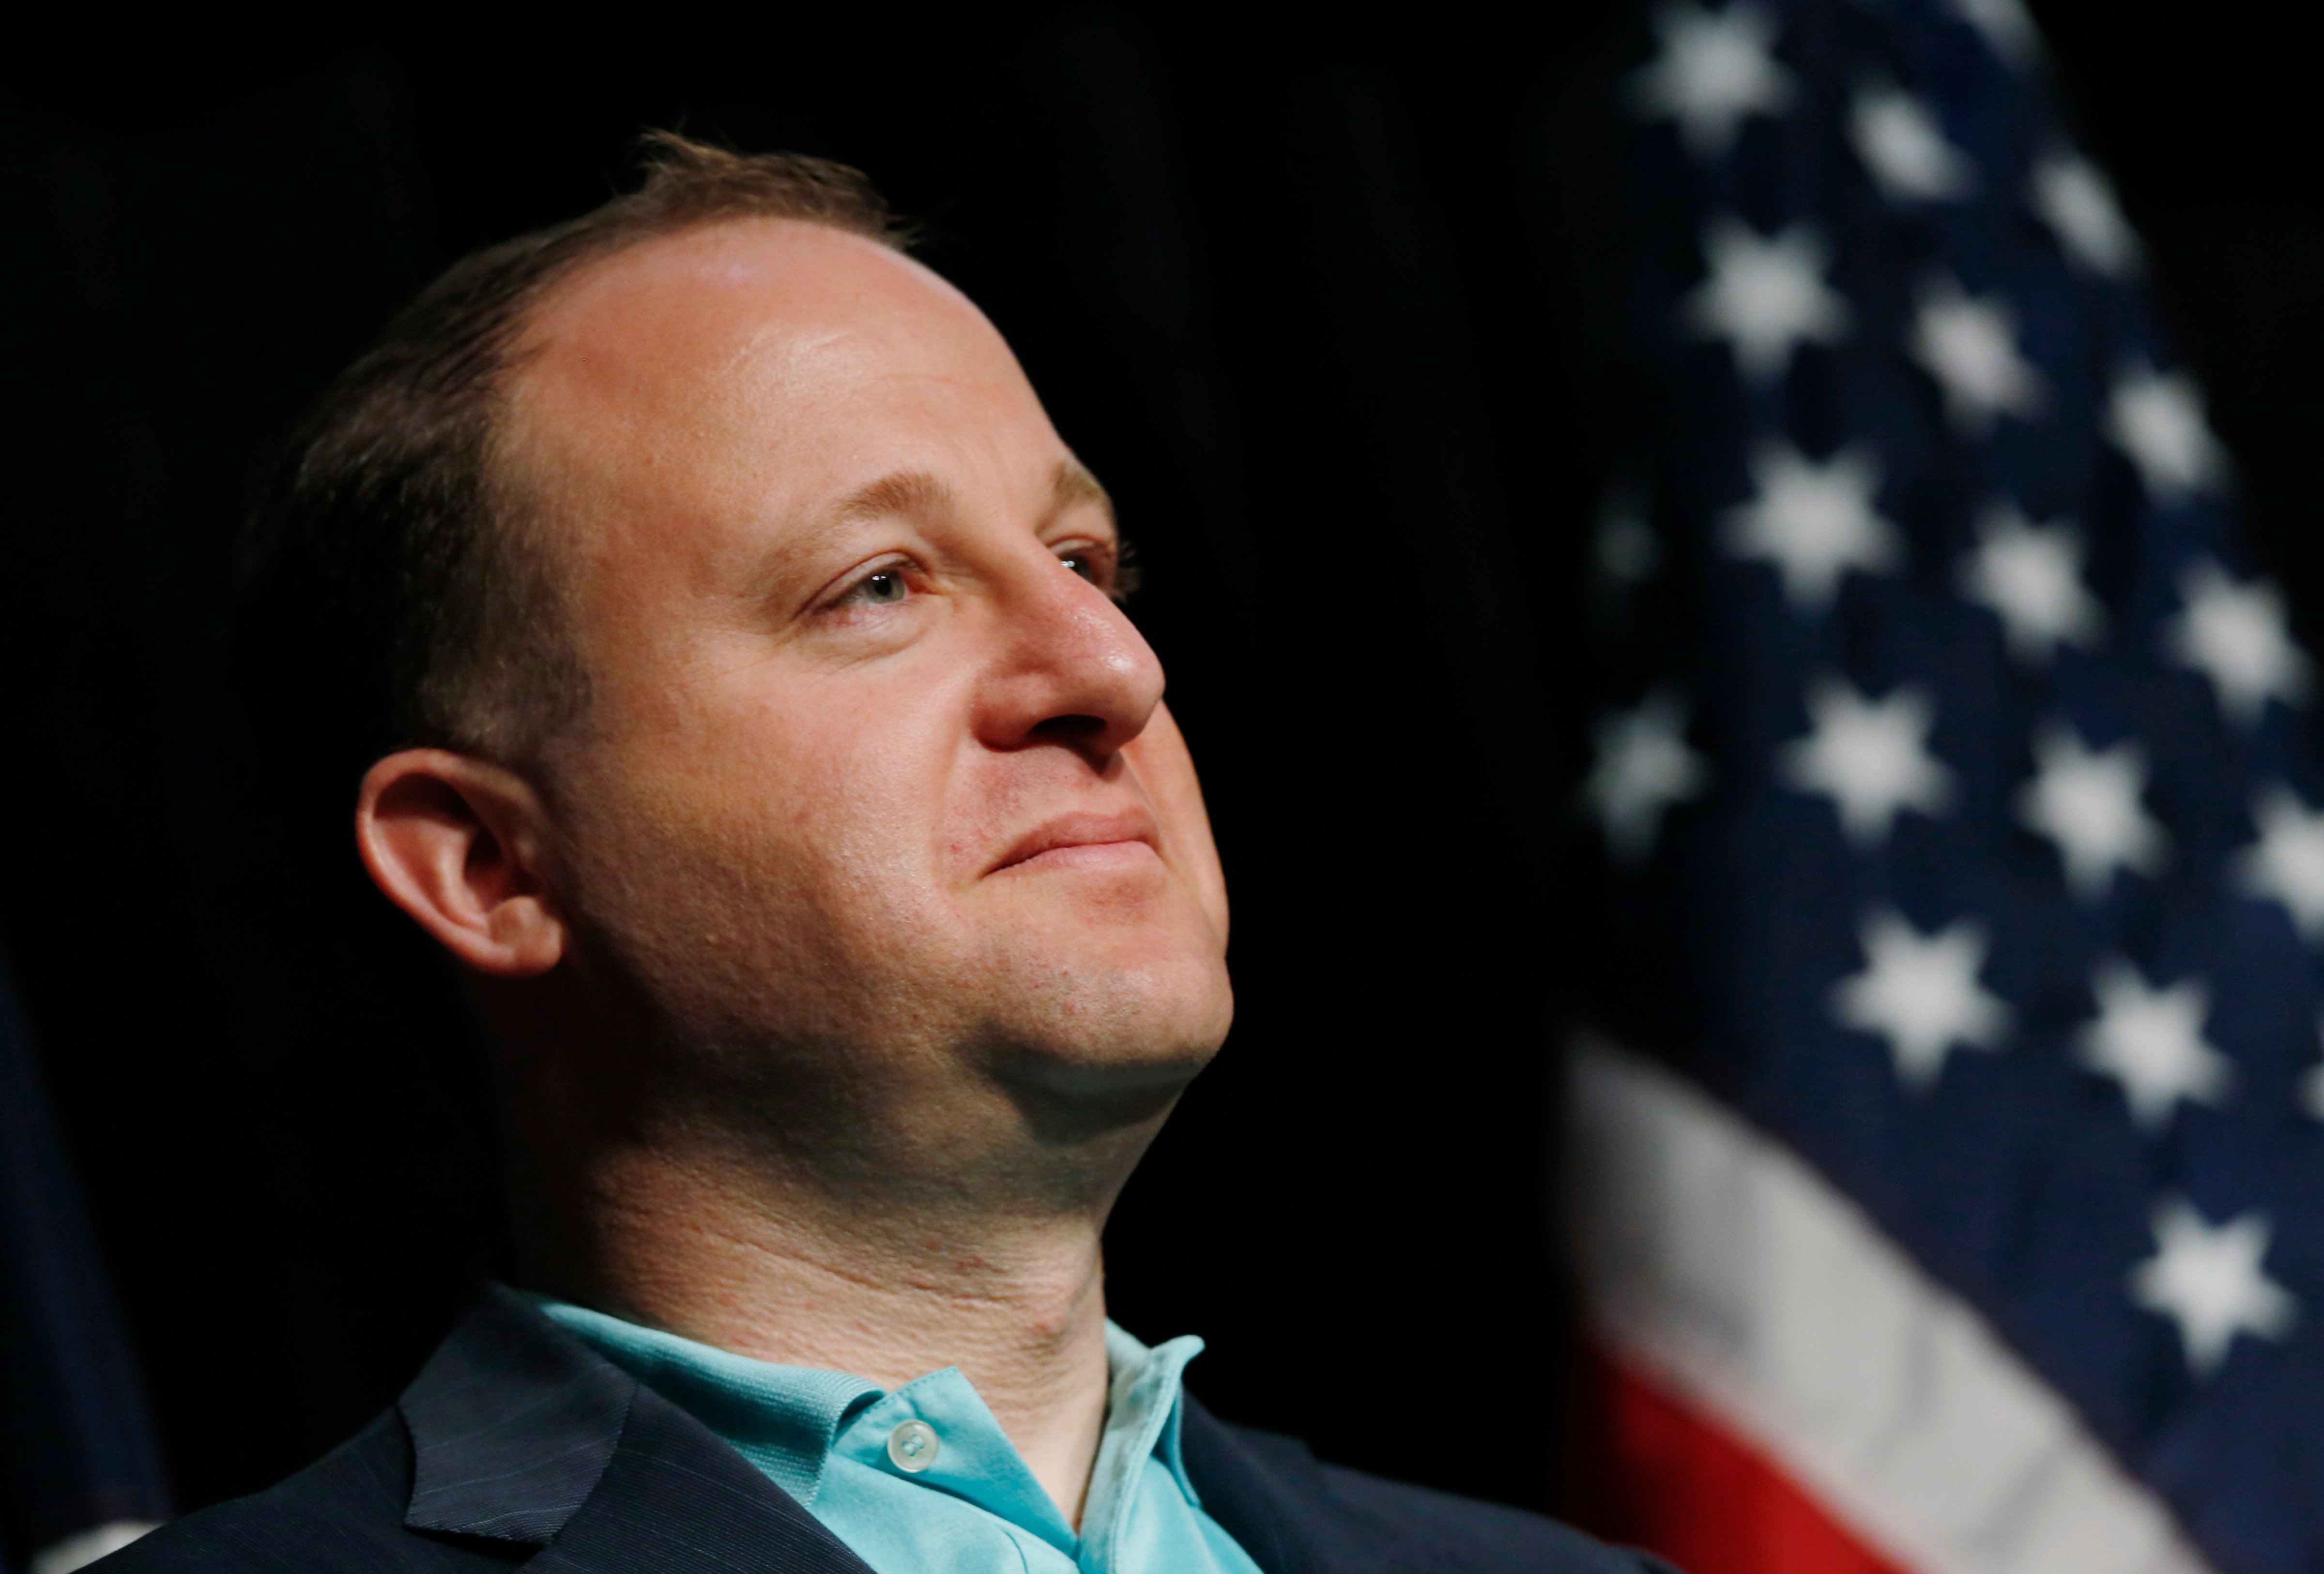 U.S. Rep. Jared Polis, D-Colo., looks on during the Colorado Democratic Party's State Assembly in Denver on April 12, 2014